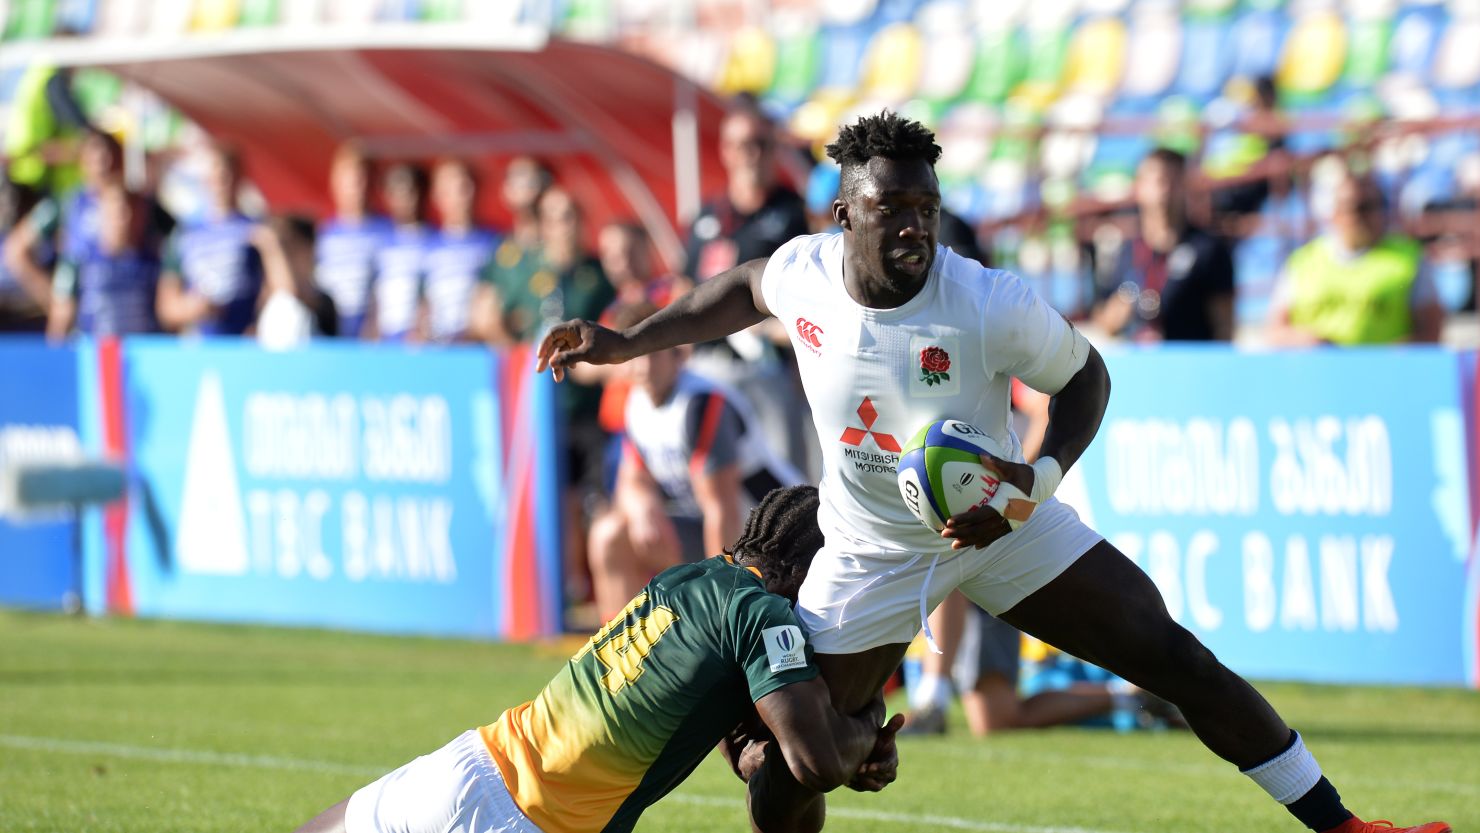 Gabriel Ibitoye of England is tackled by Yaw Penxe of South Africa during the World Rugby U20 Championship Semi Final match between England and South Africa at Mikheil Meskhi Stadium on June 13, 2017 in Tbilisi, Georgia. (Photo by Mark Runnacles/Getty Images)